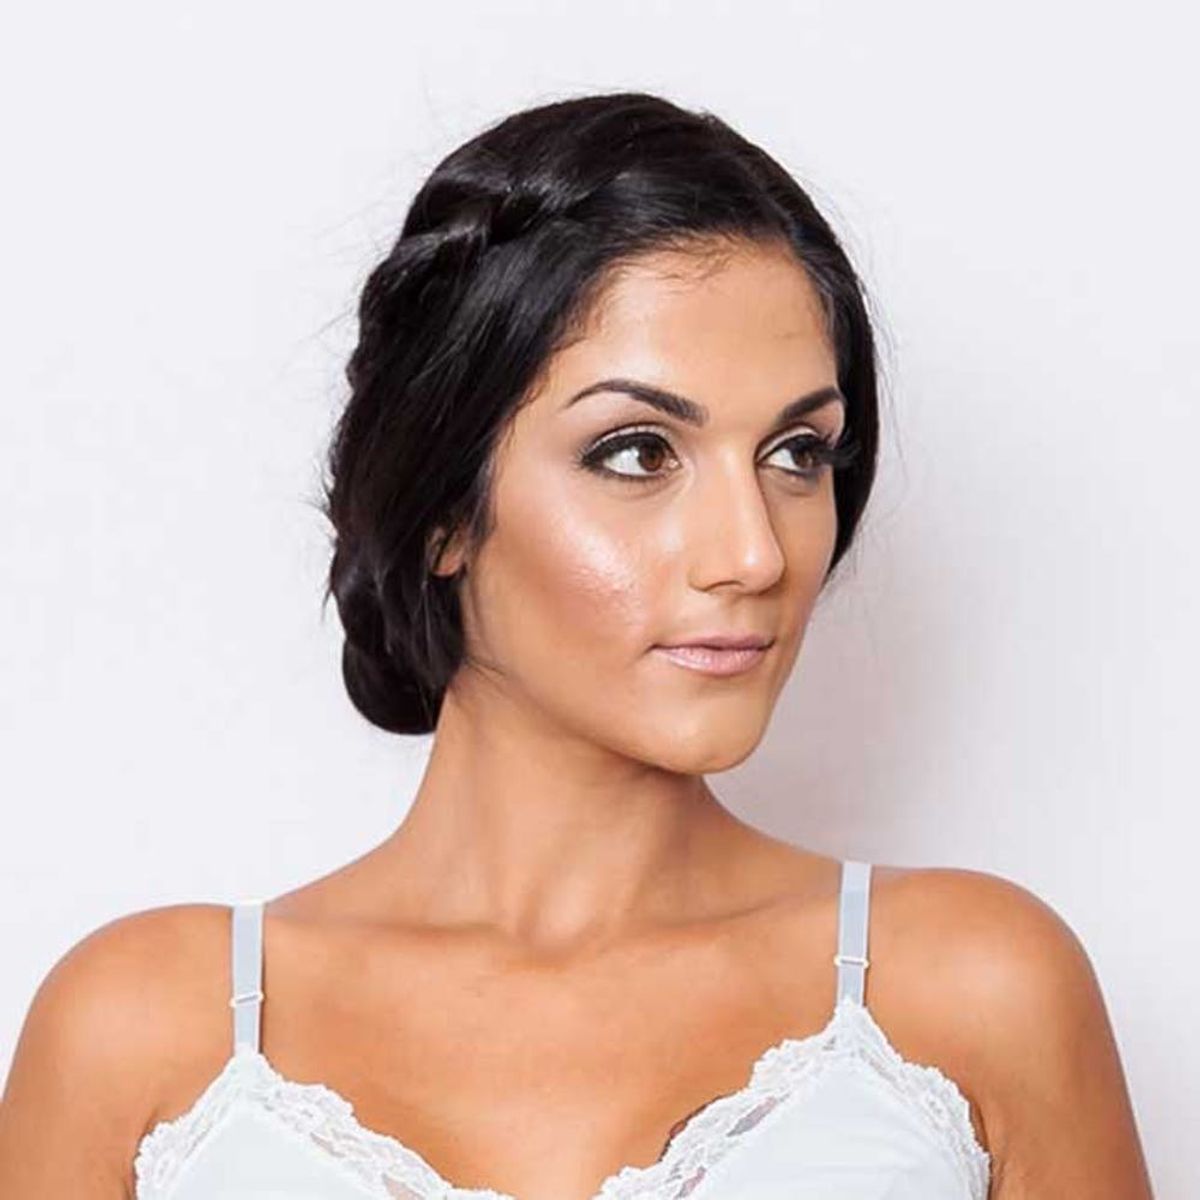 Take This Wedding Hairstyle from Down-‘Do to Updo in Seconds